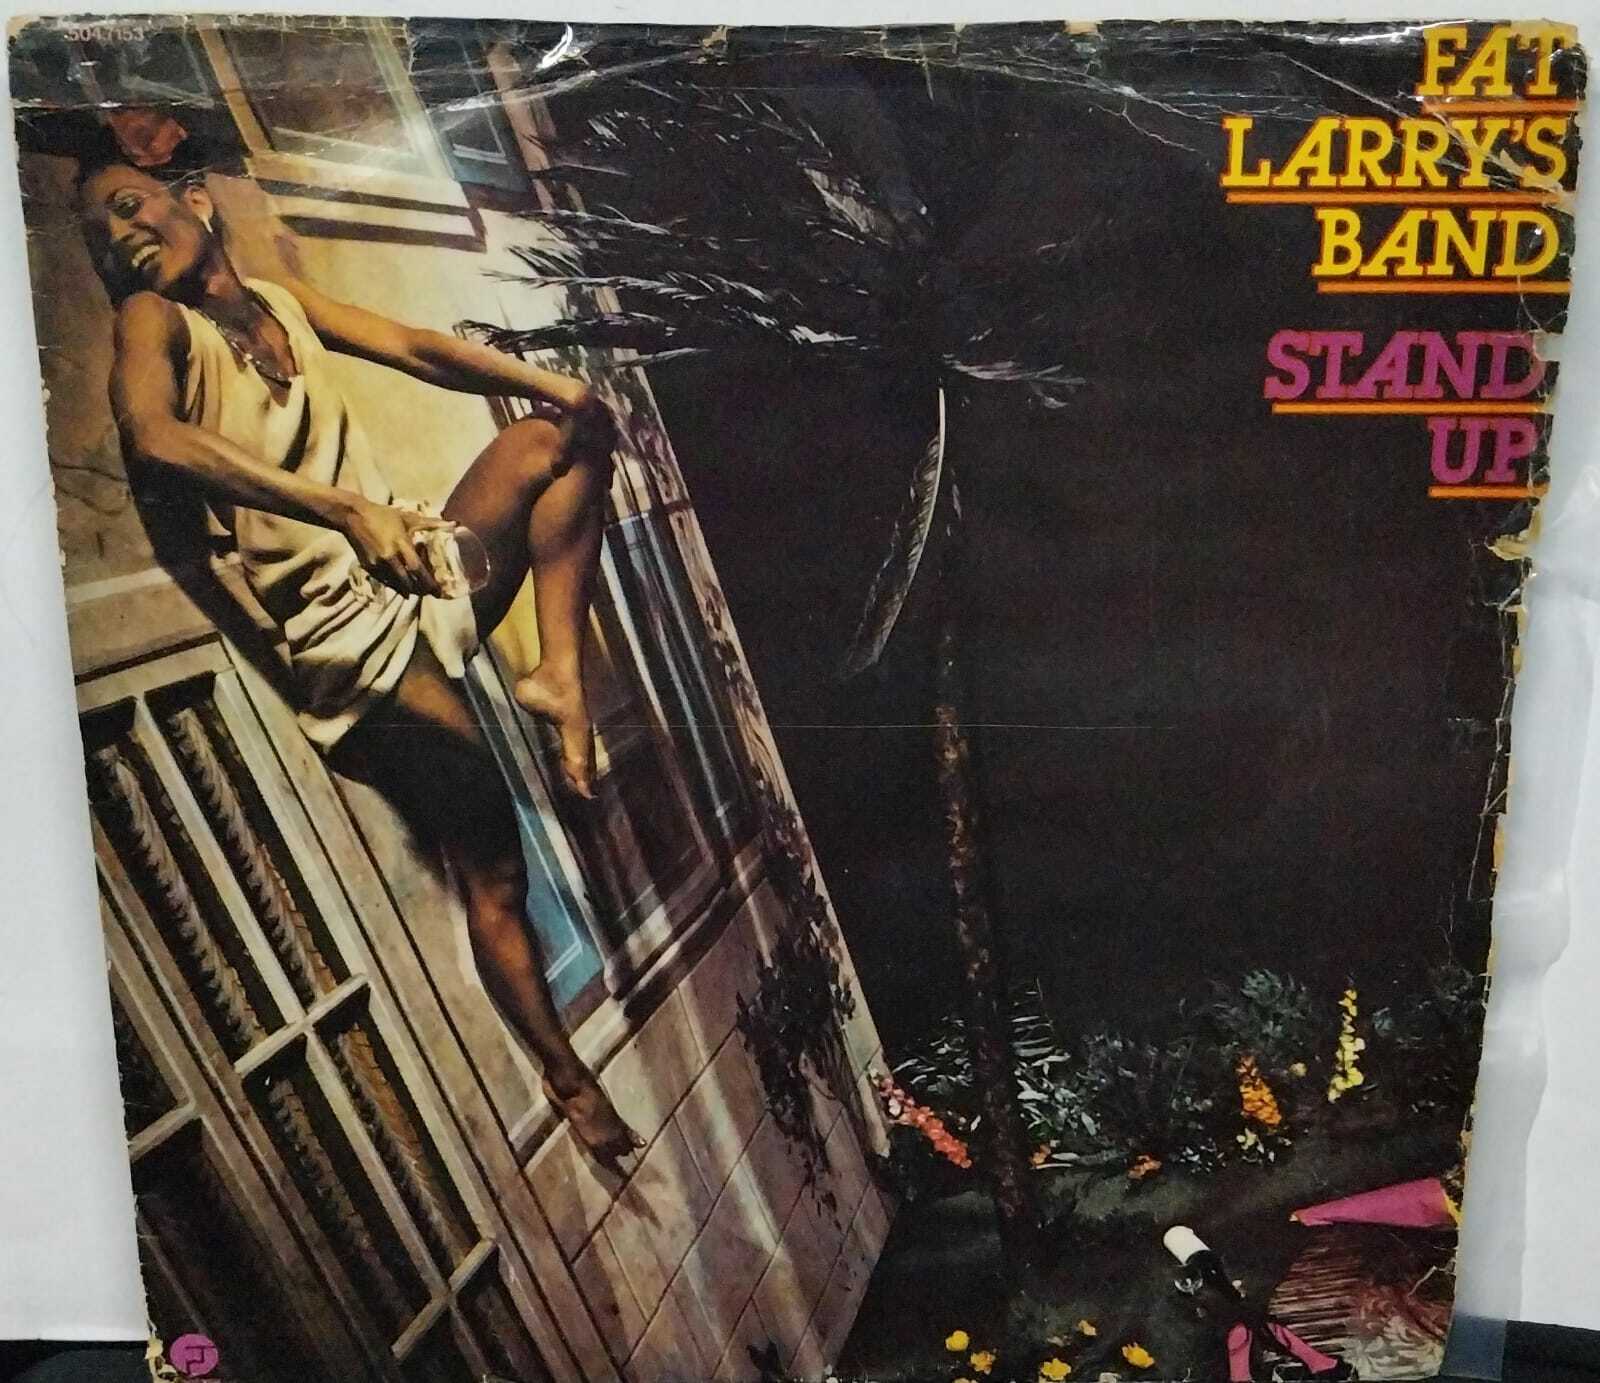 Vinil - Fat Larrys Band - Stand Up